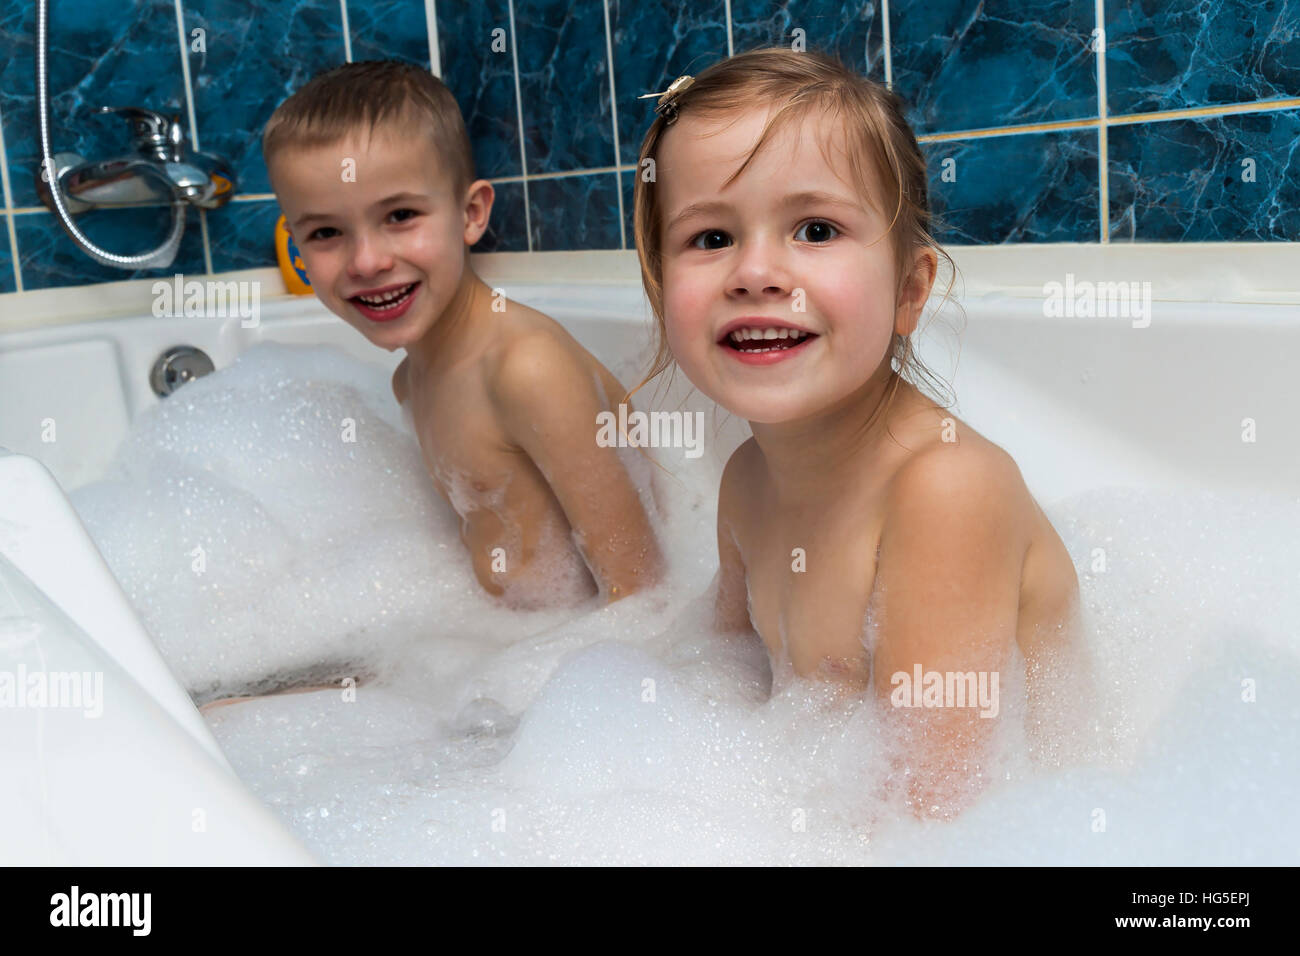 Brother and sister taking a bubble bath. Little boy and girl playing. Healthcare and hygiene concept. Stock Photo